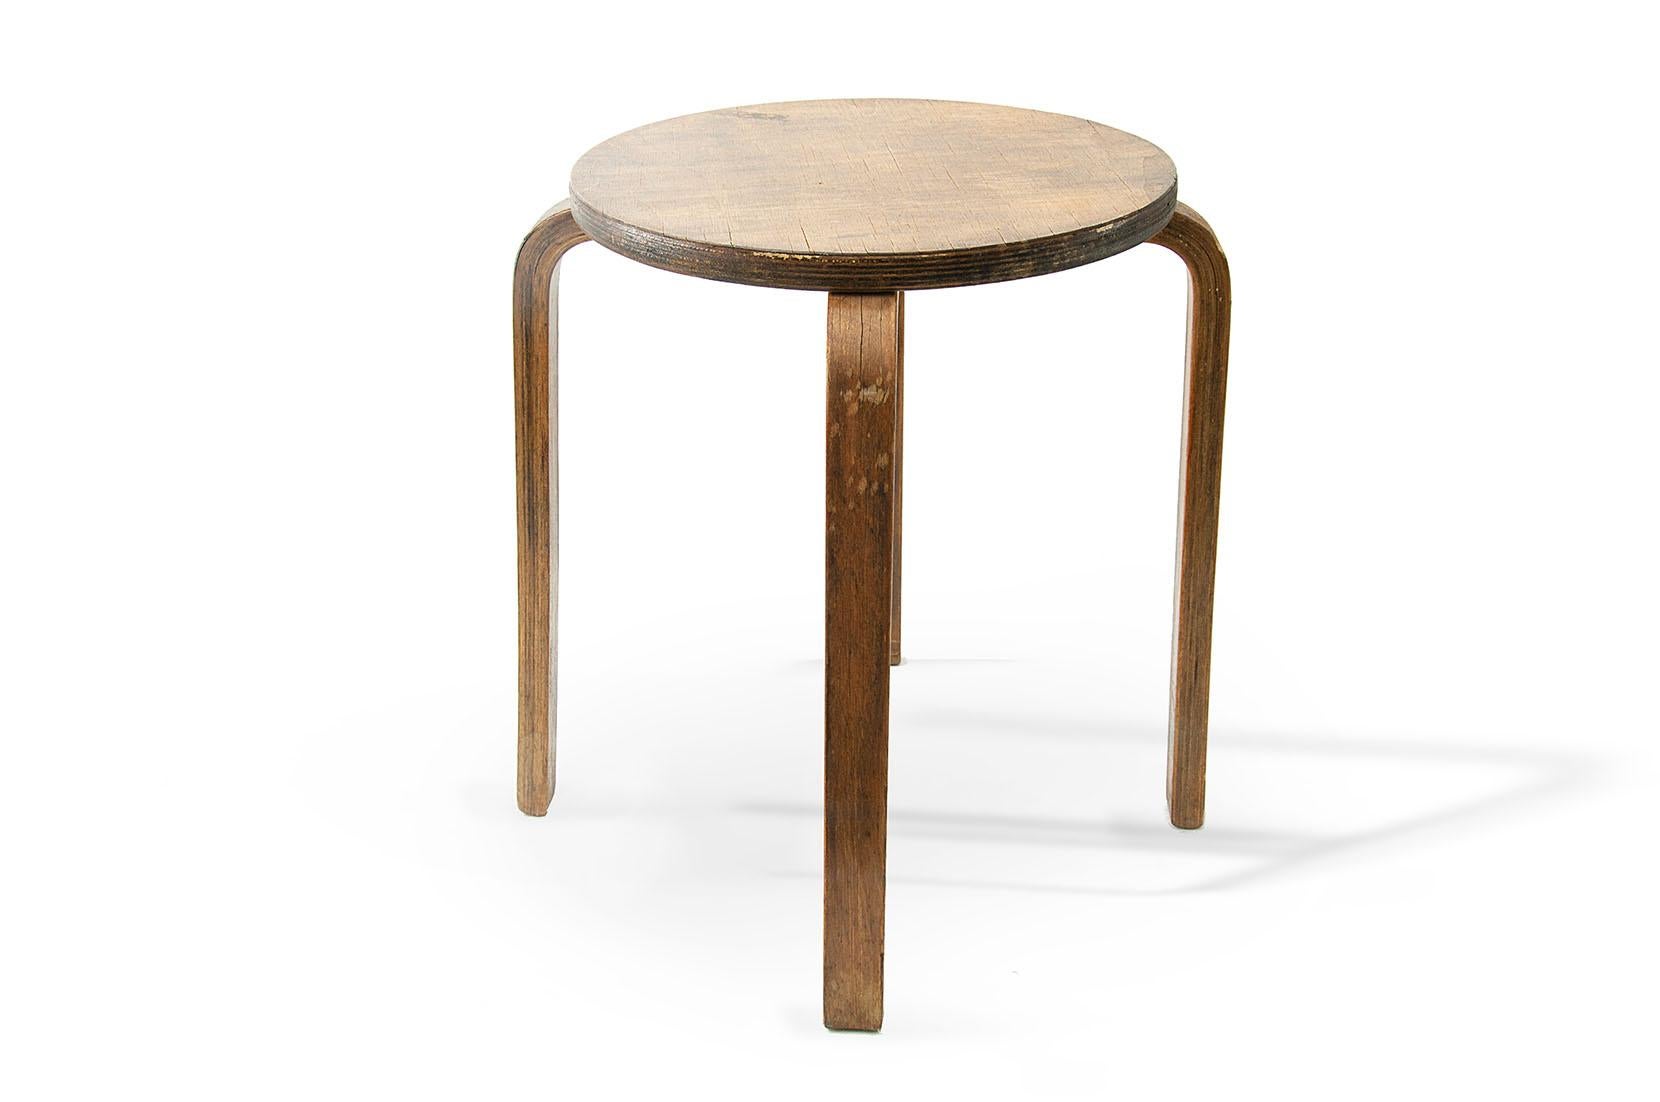 Mid-20th Century Stool Atributed to Alvar Aalto, in Wood, Finland circa 1960, for Artek, Brown